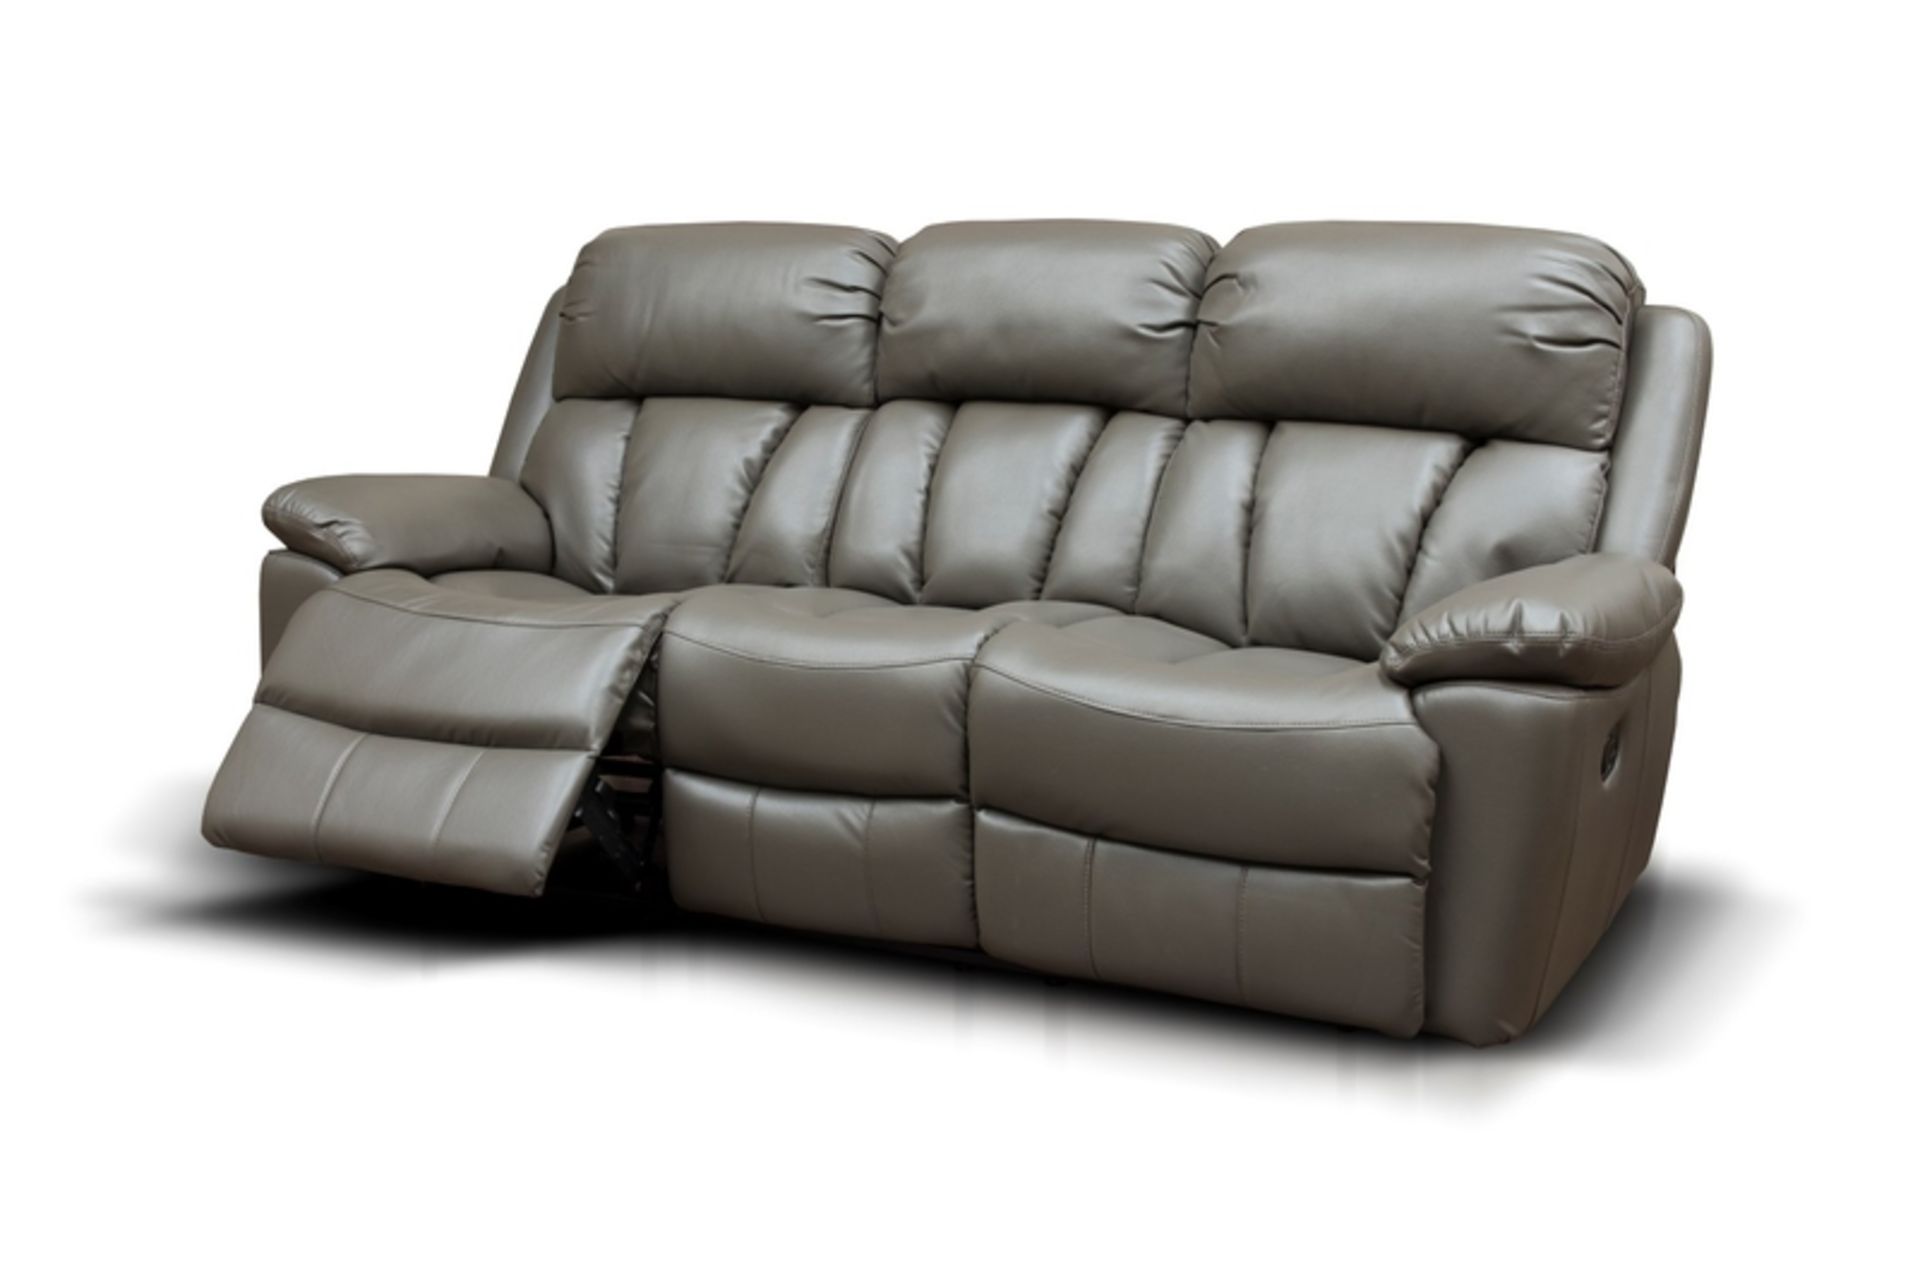 Brand New Boxed Benson 3 Seater Grey Leatheraire Reclining Sofa Plus 2 Matching Arm Chairs